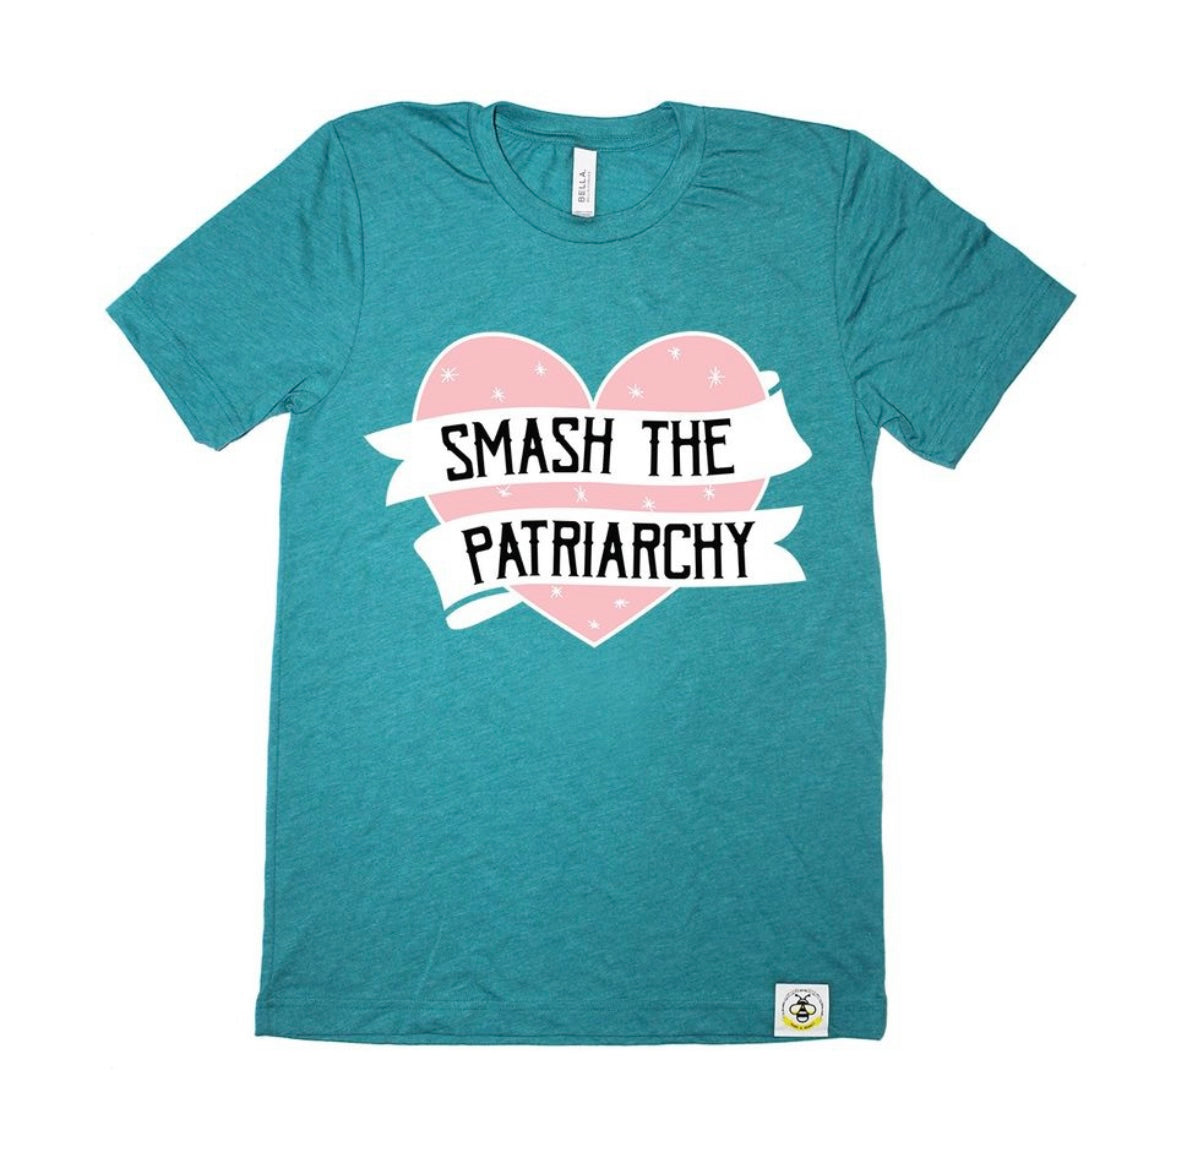 Smash The Patriarchy (Adult)